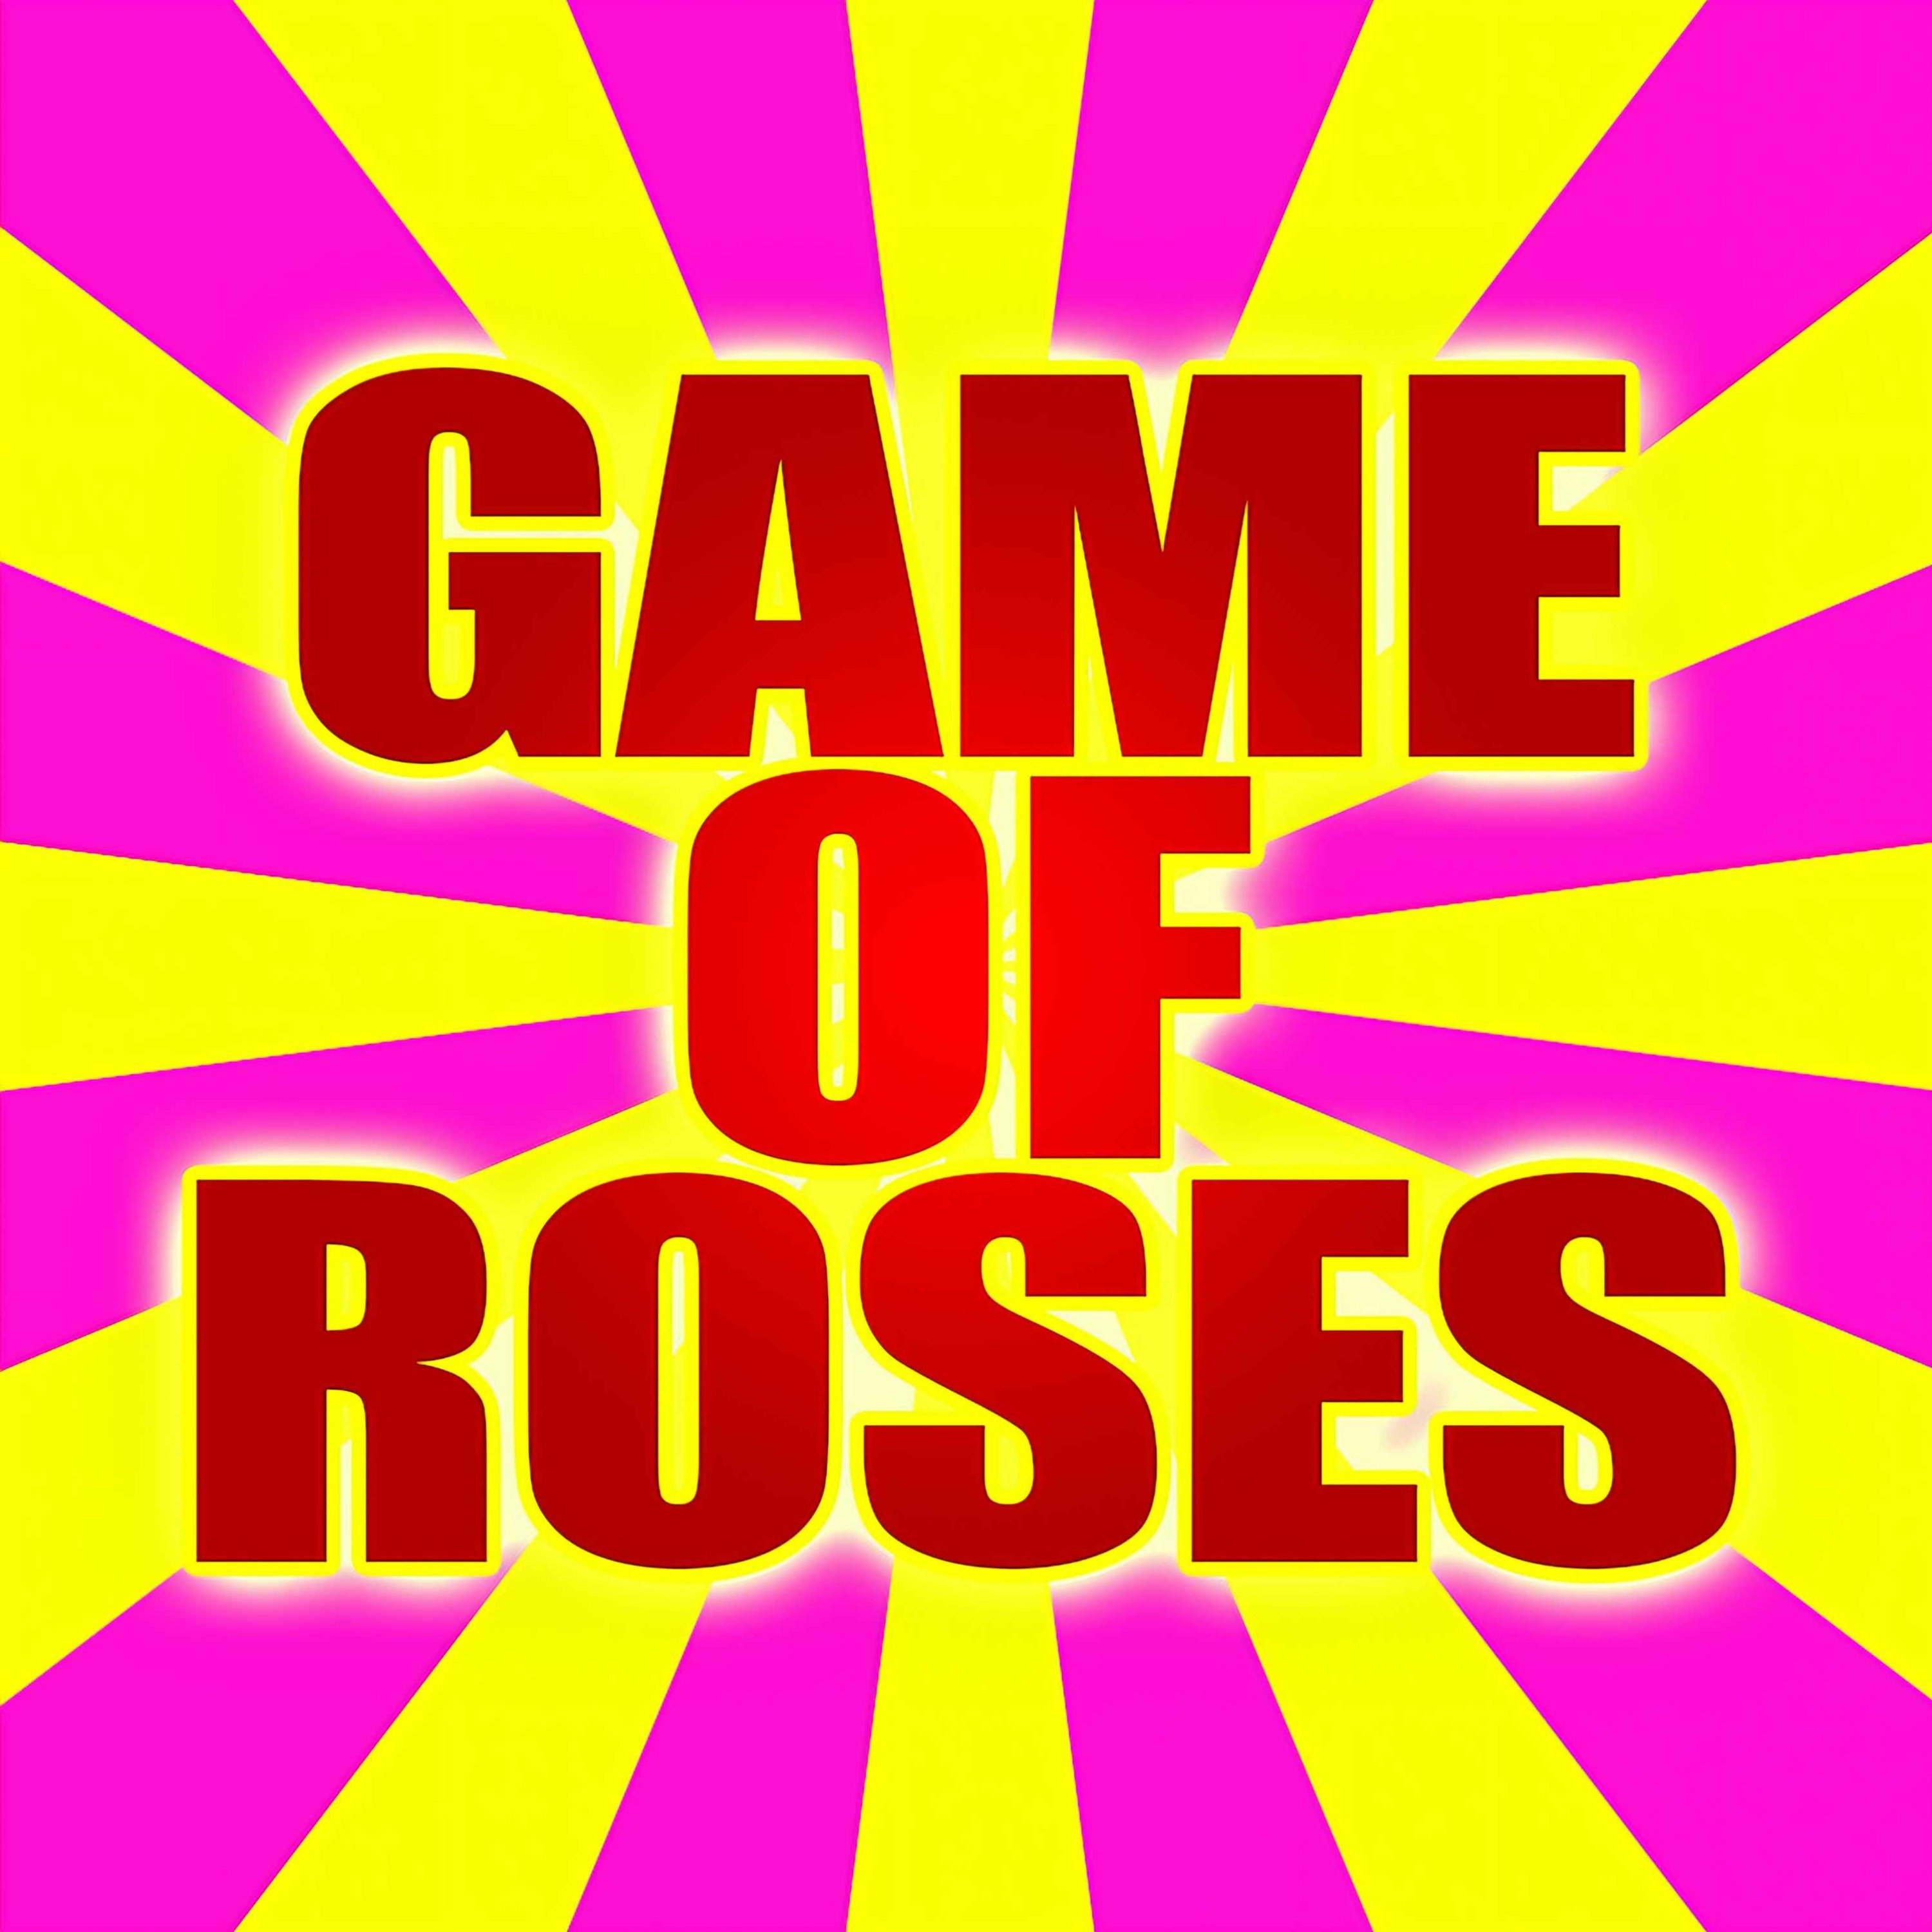 Game of Roses:Game of Roses